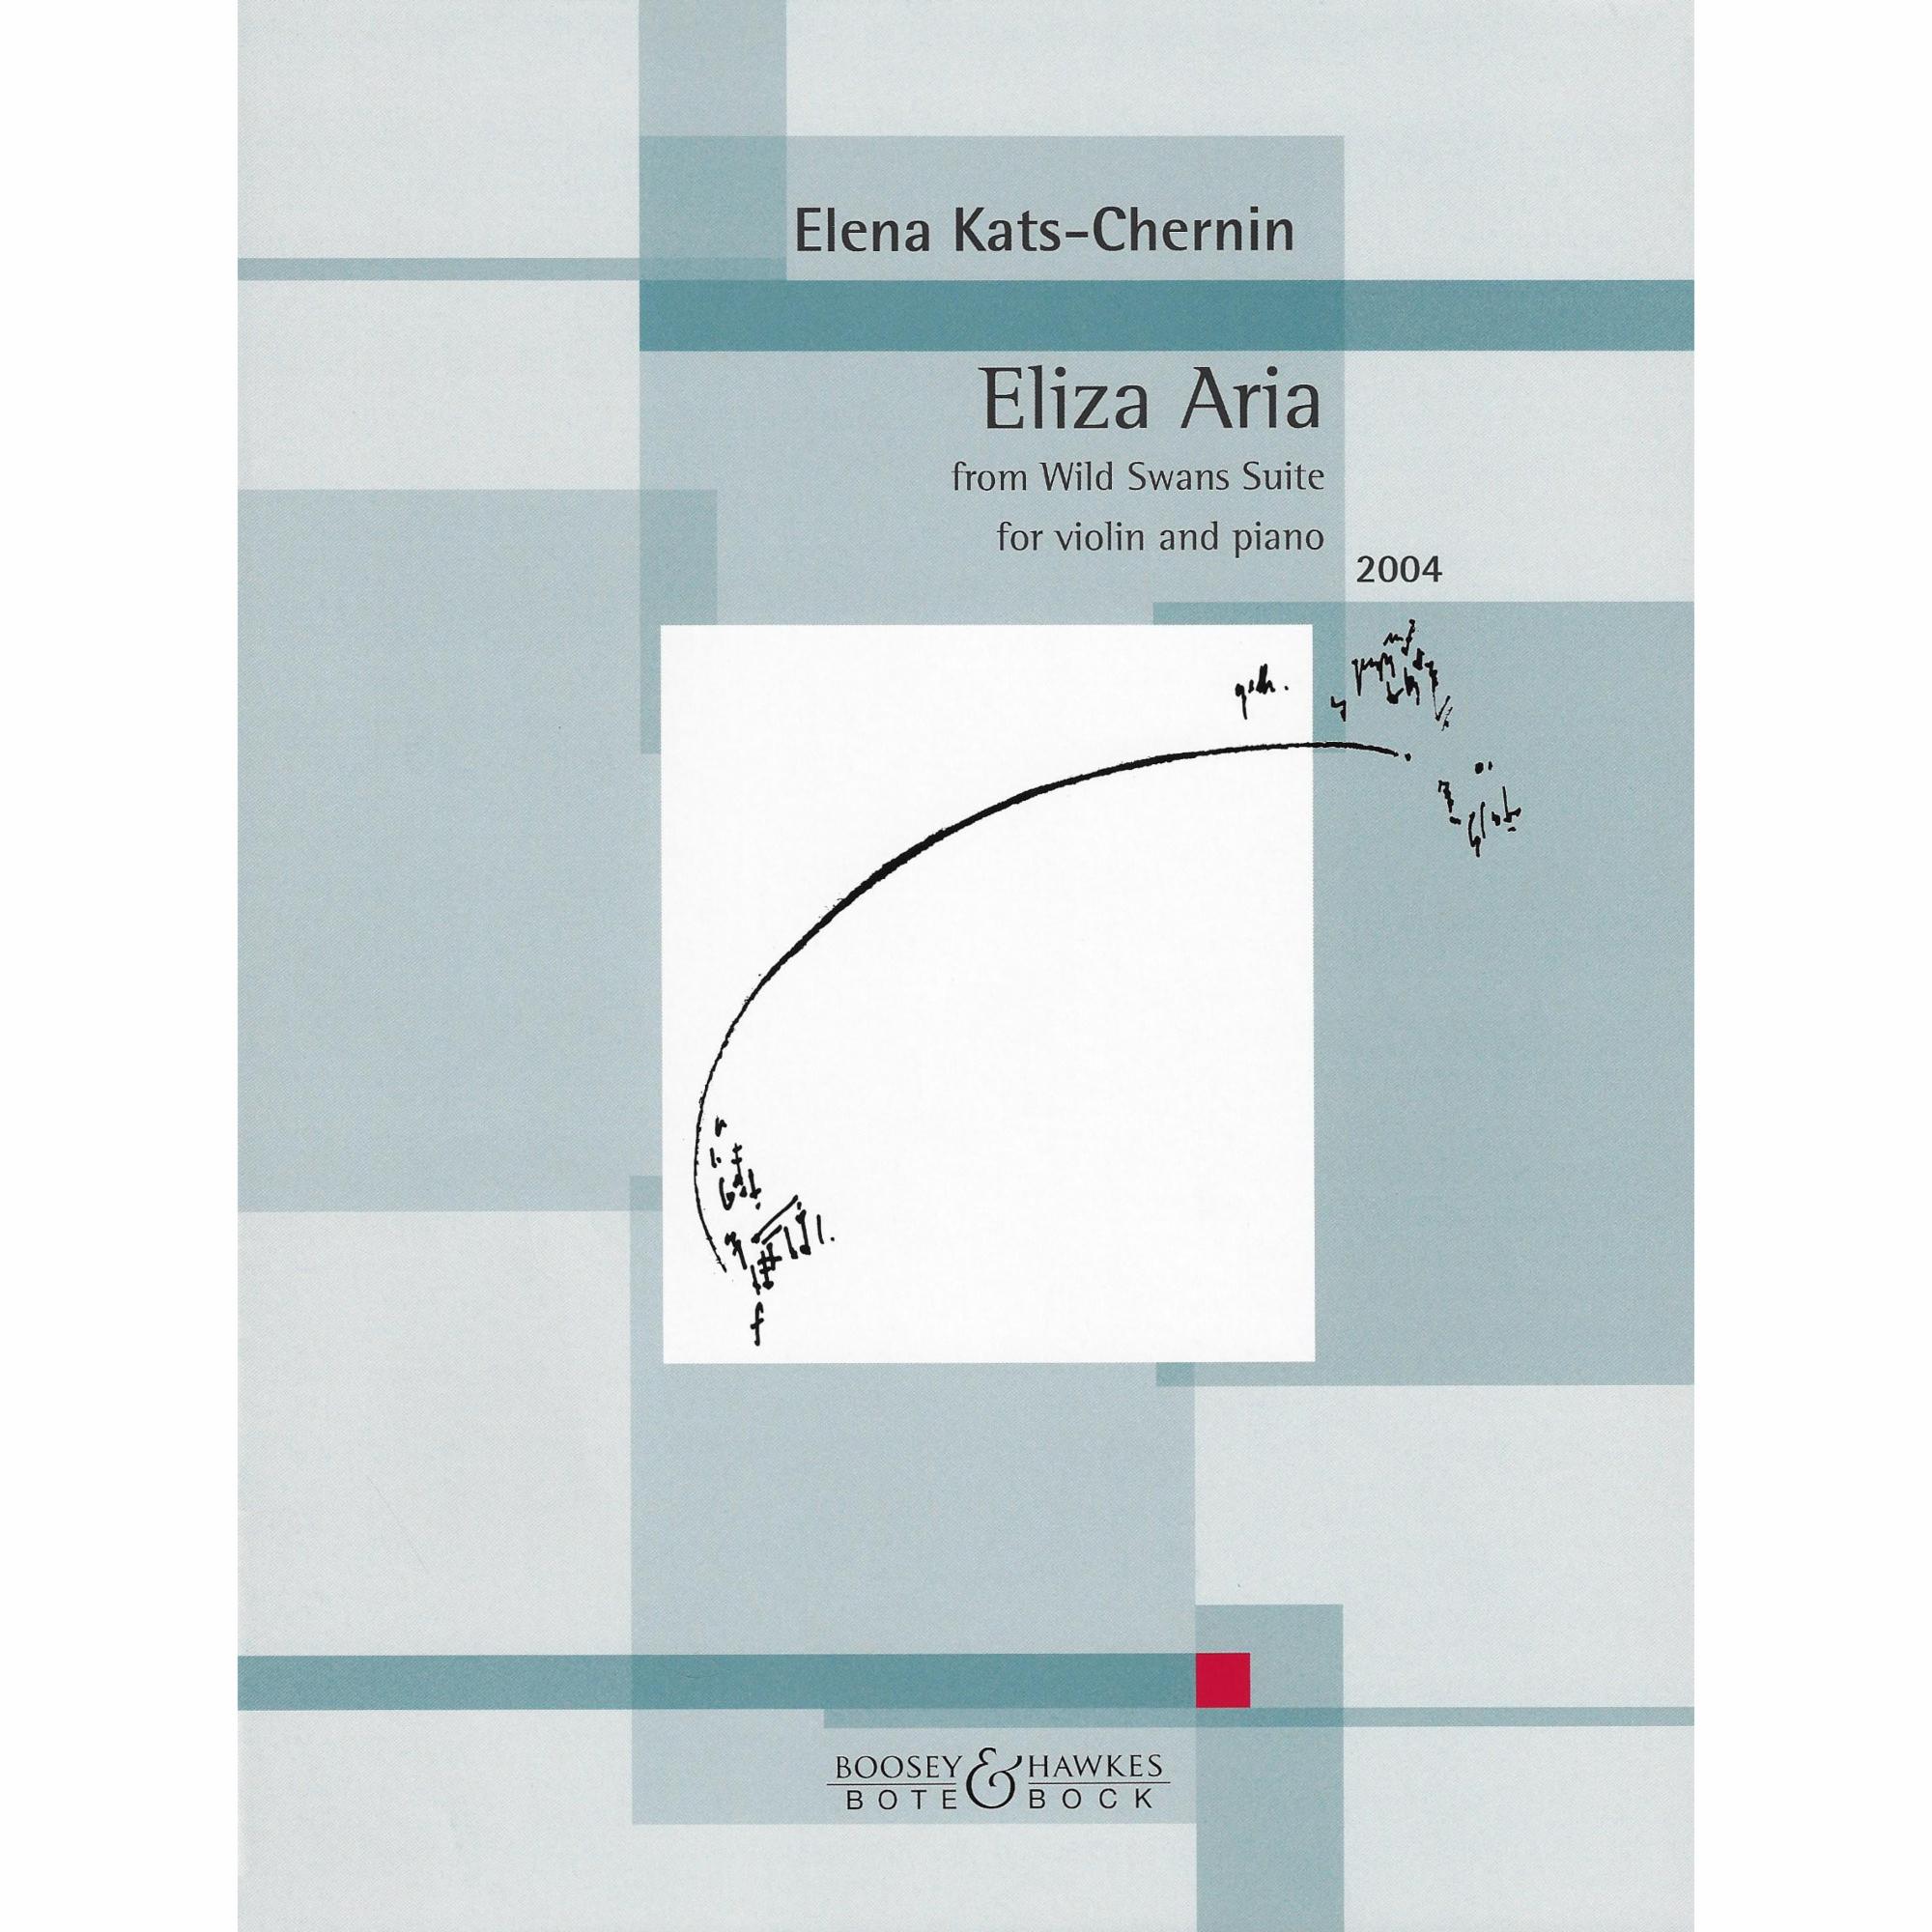 Kats-Chernin -- Eliza Aria, from Wild Swans Suite for Violin and Piano